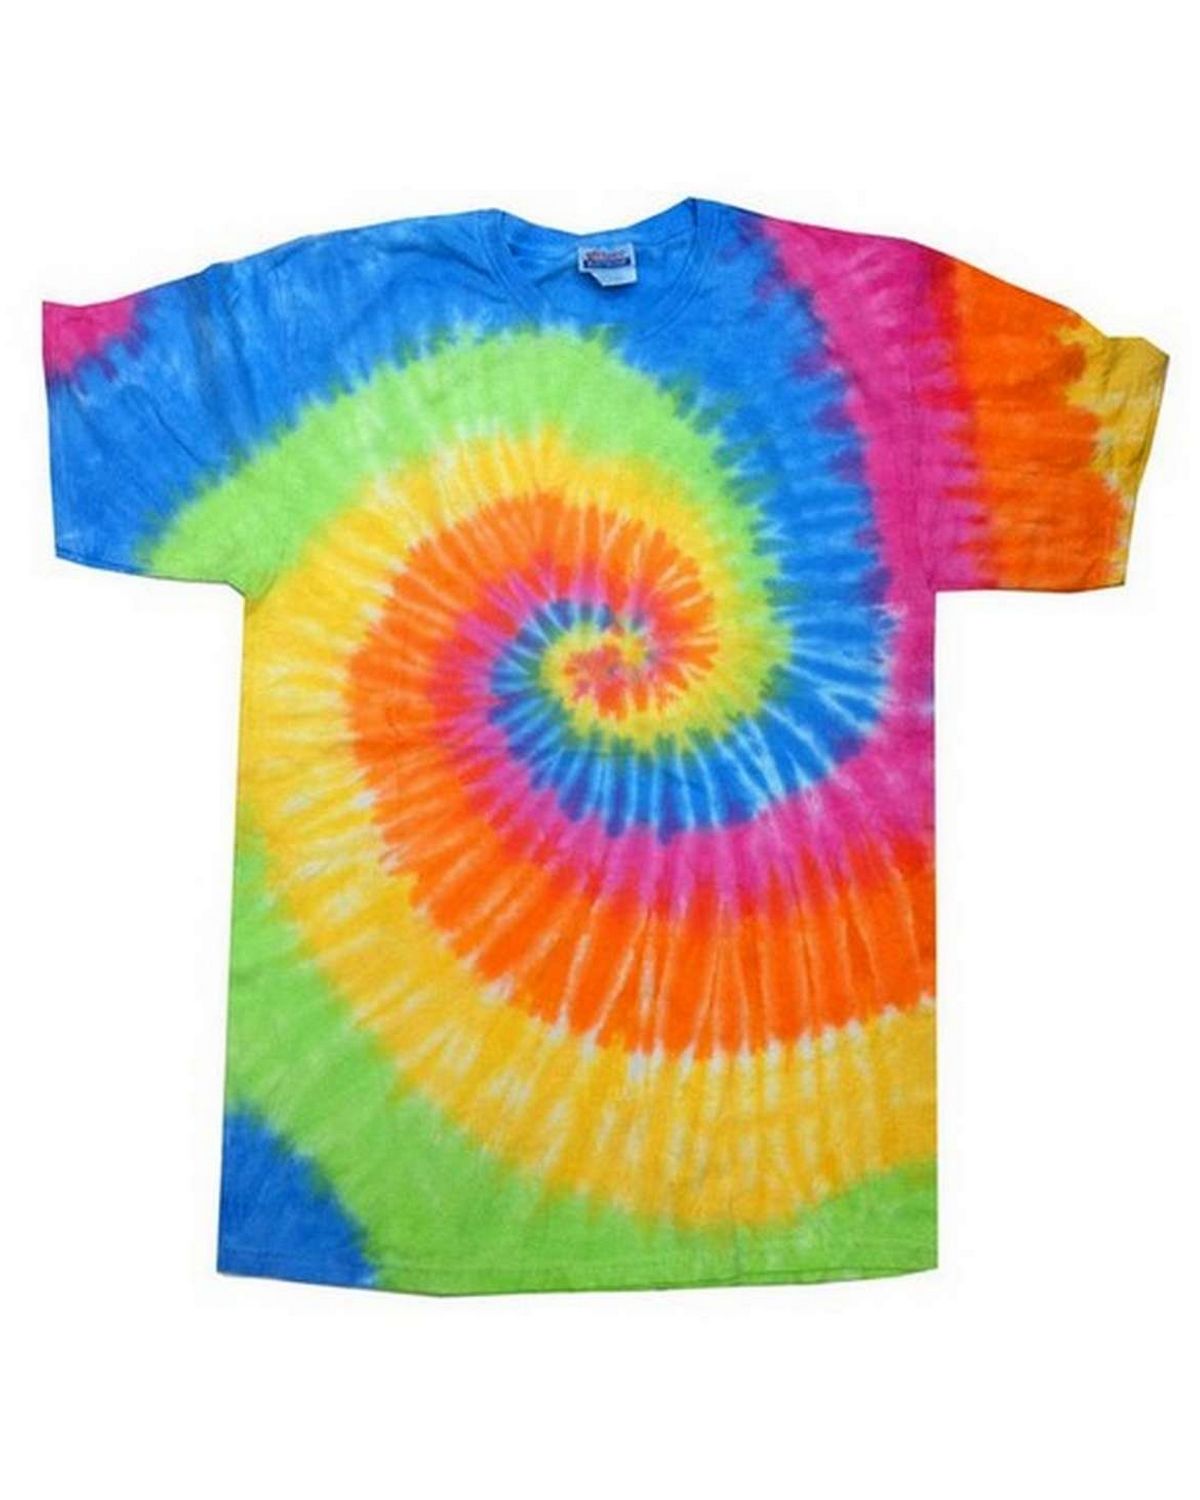 Tie-Dye H1000 Tie-Dyed Adult Cotton Tee - Shop at ApparelnBags.com